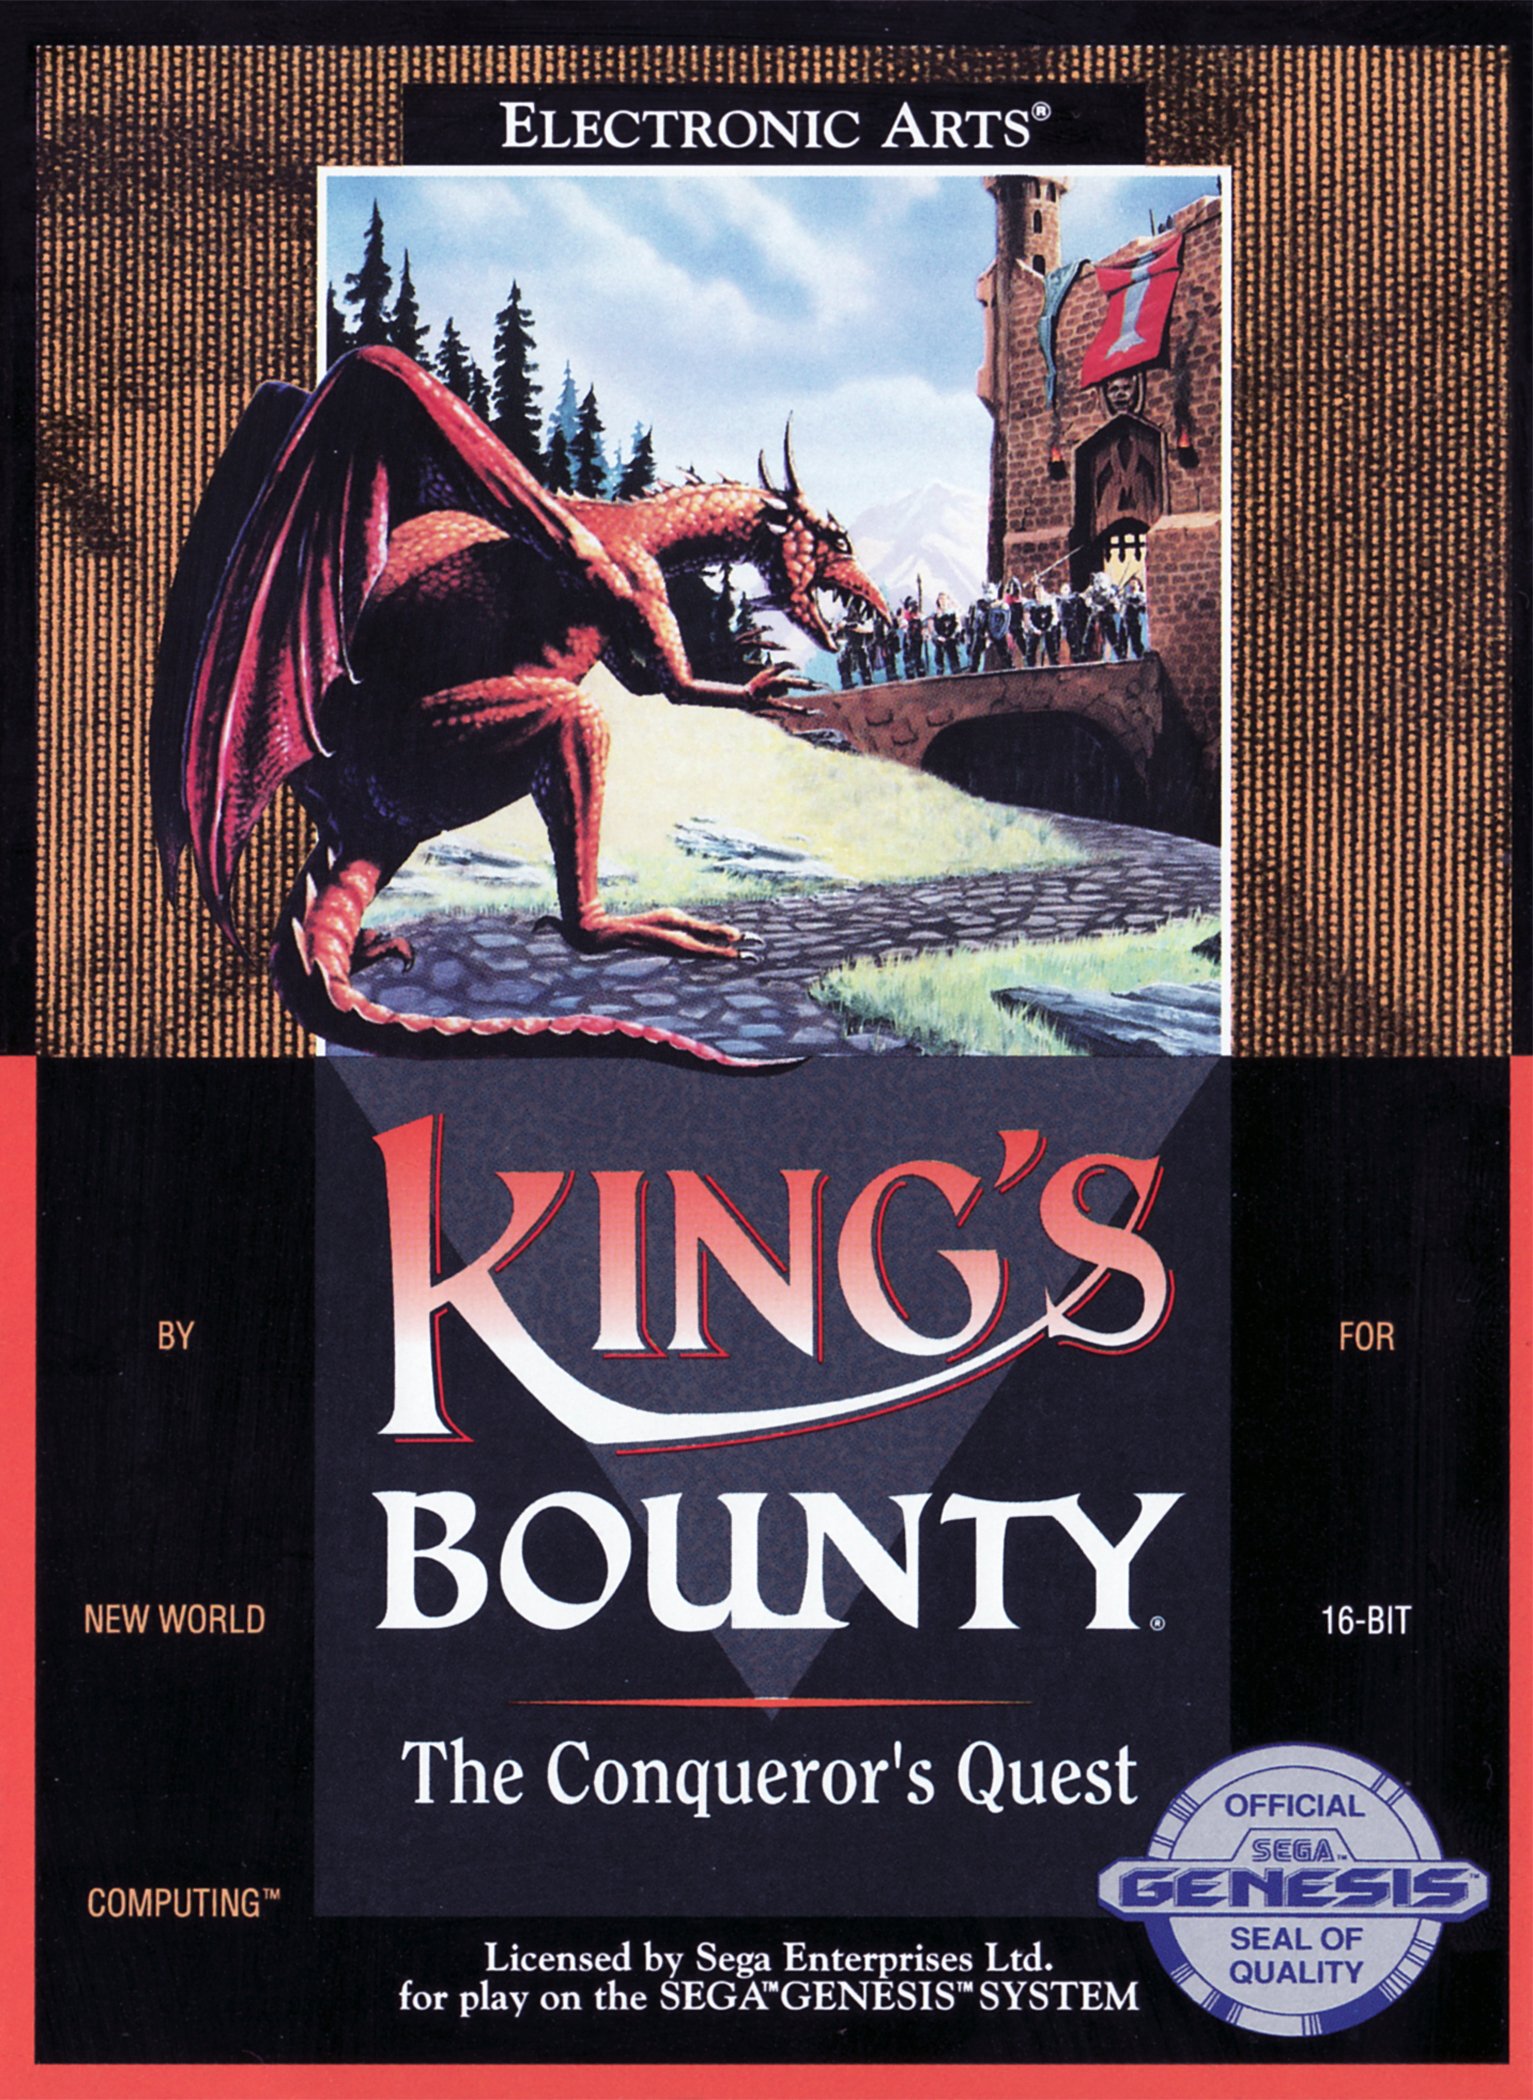 Image of King's Bounty: The Conqueror's Quest